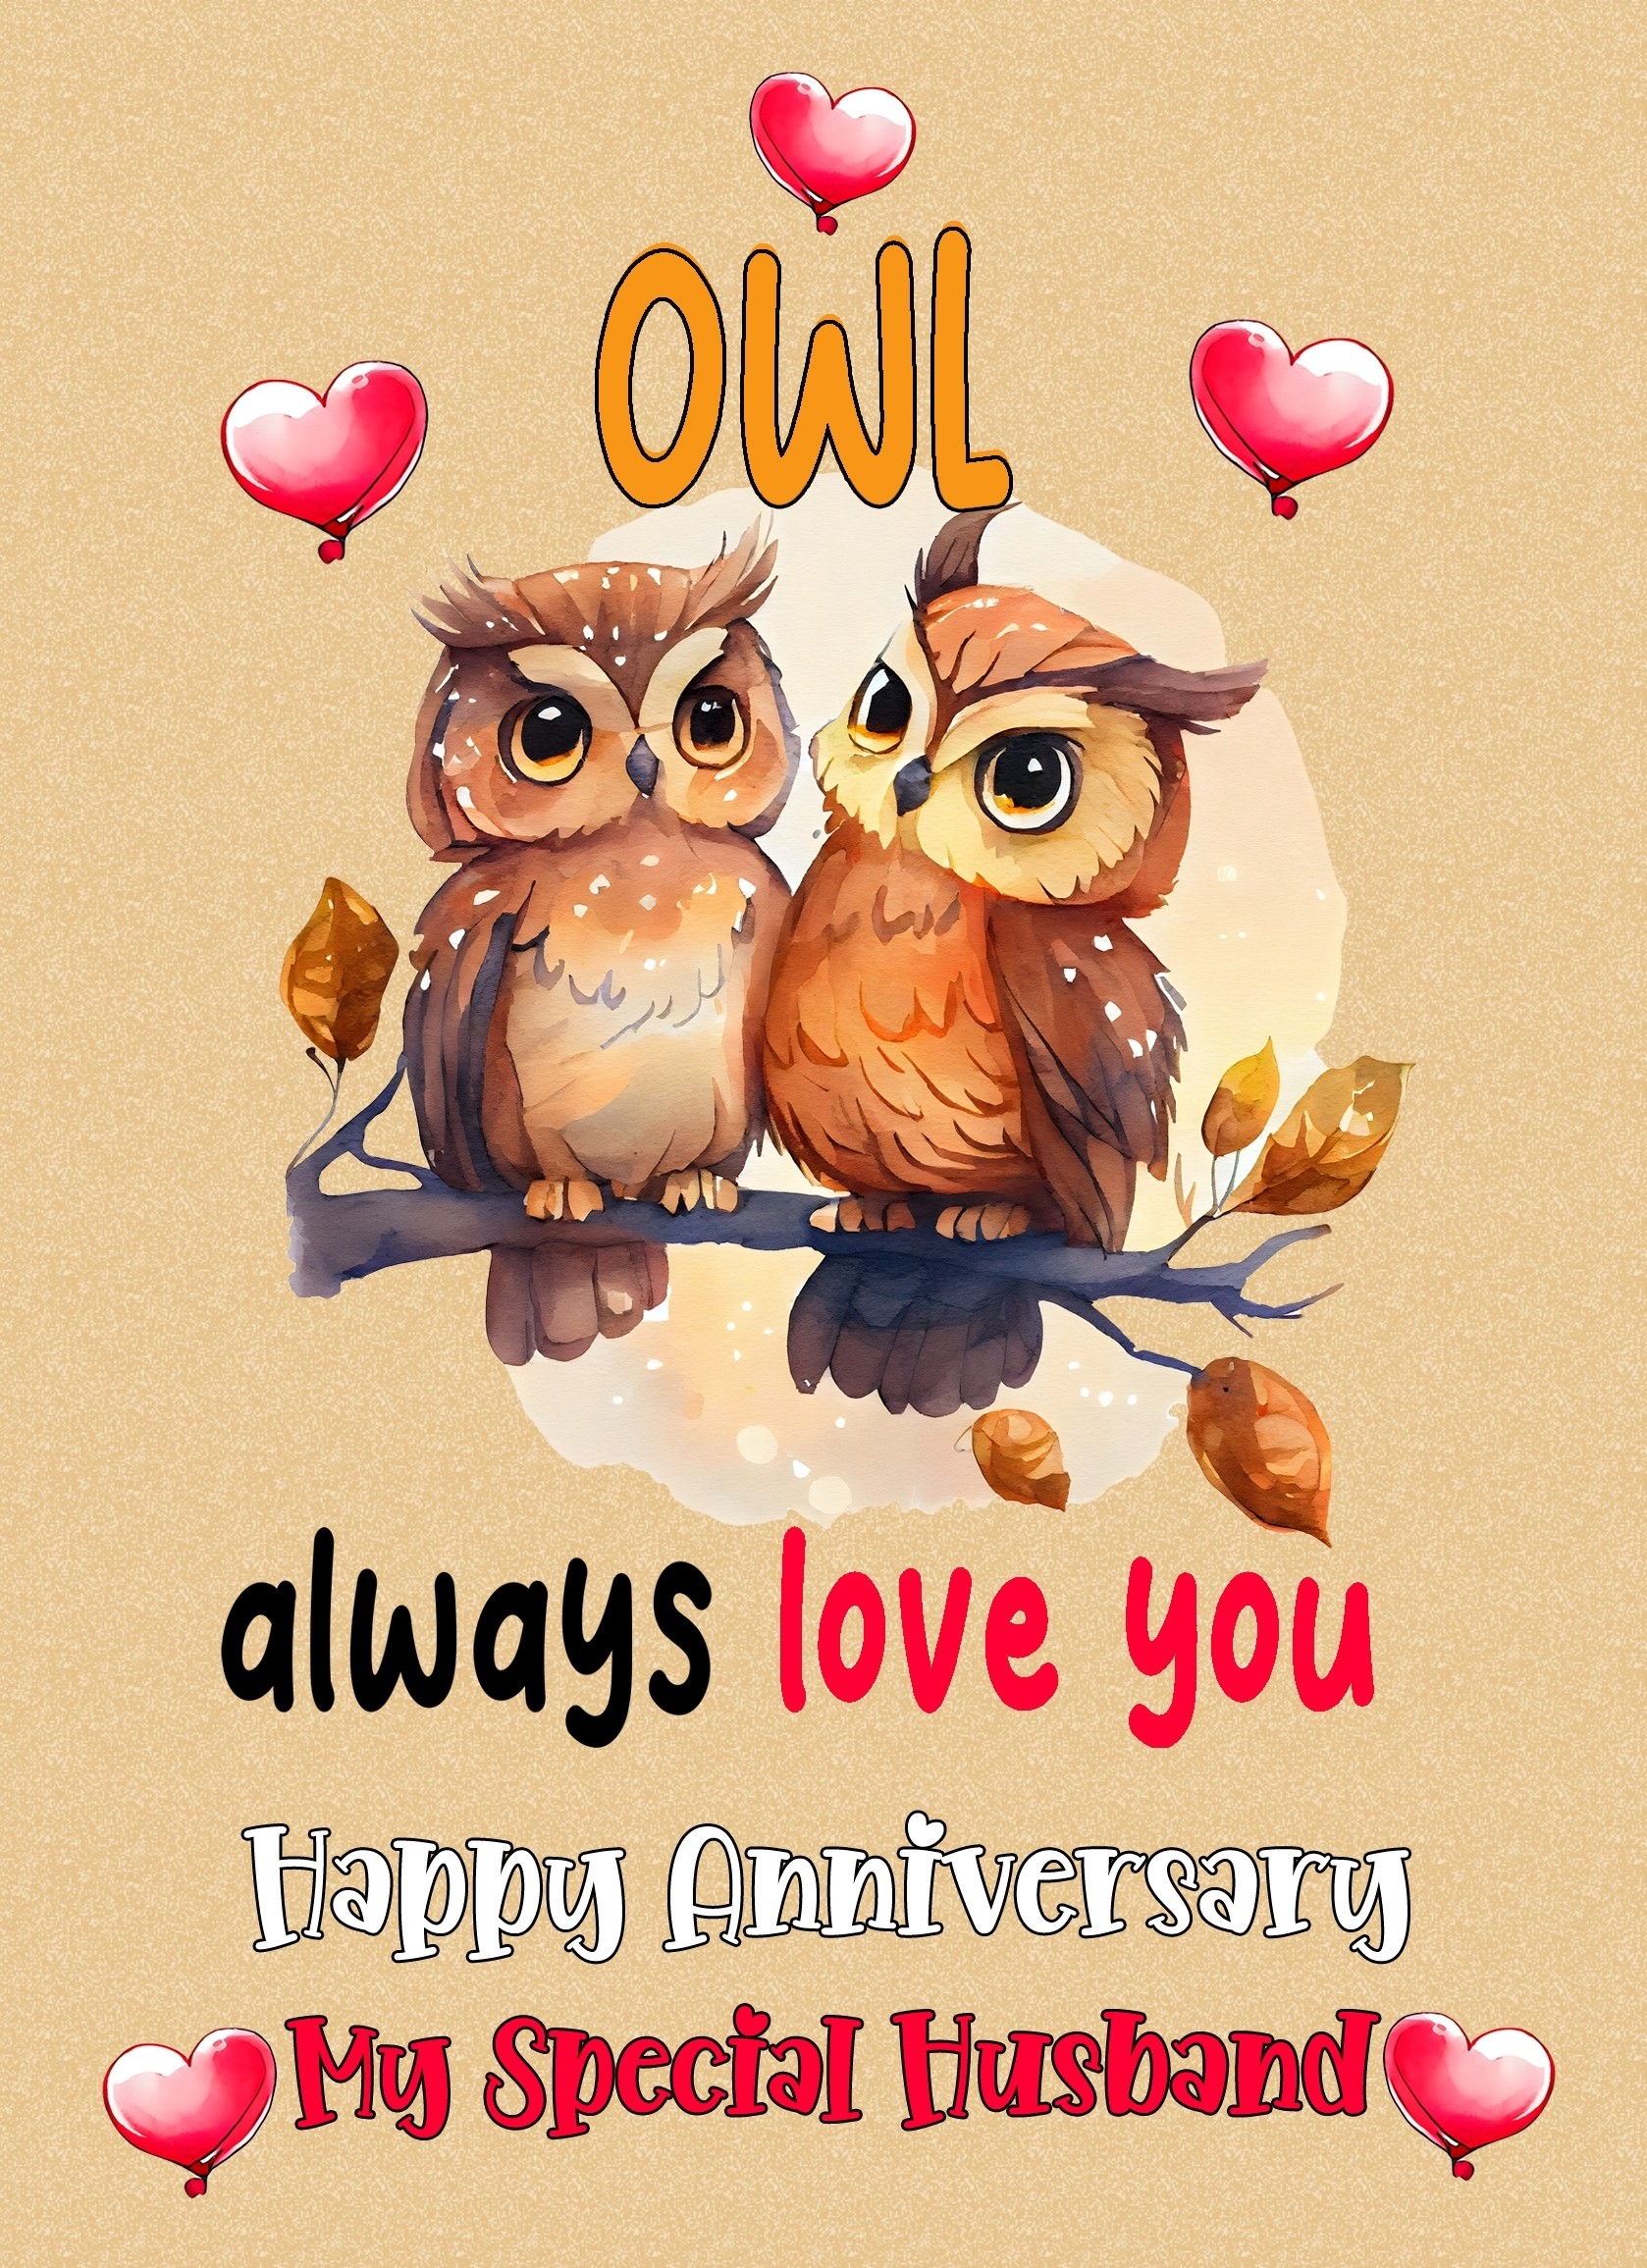 Funny Pun Romantic Anniversary Card for Husband (Owl Always Love You)